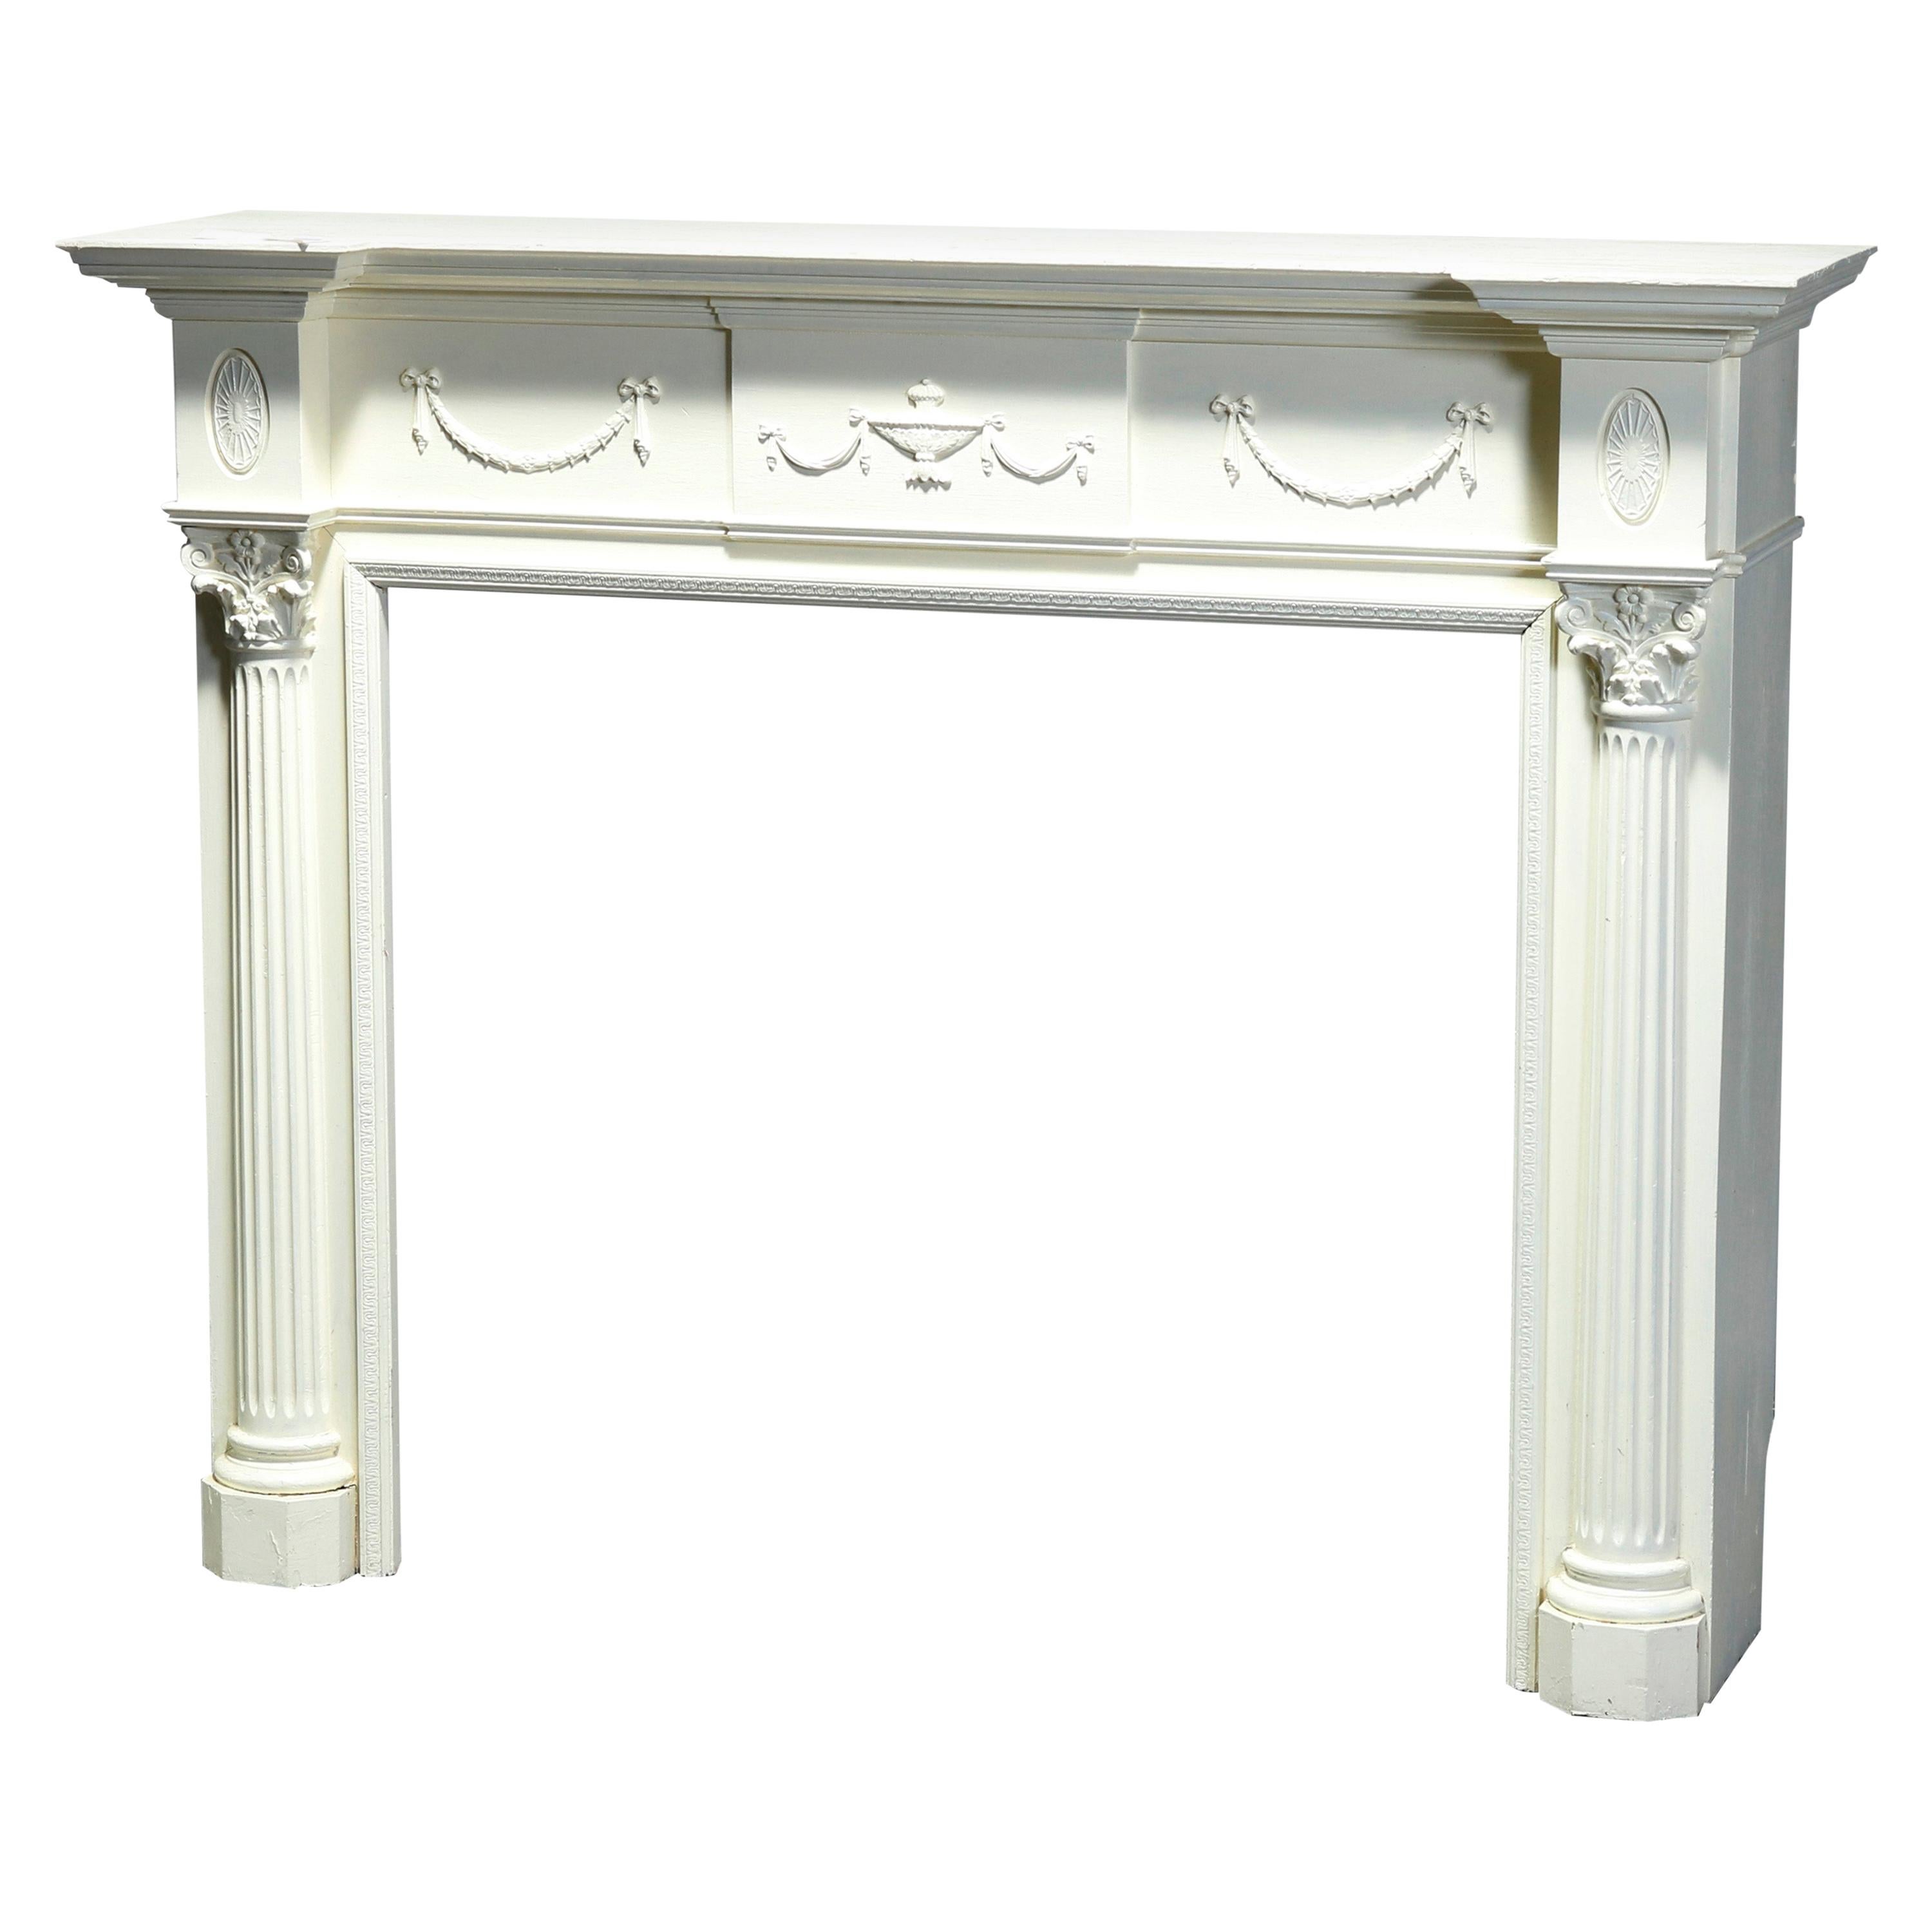 Antique Neoclassical Carved & White-Painted Fireplace Mantel, Corinthian, 20th C